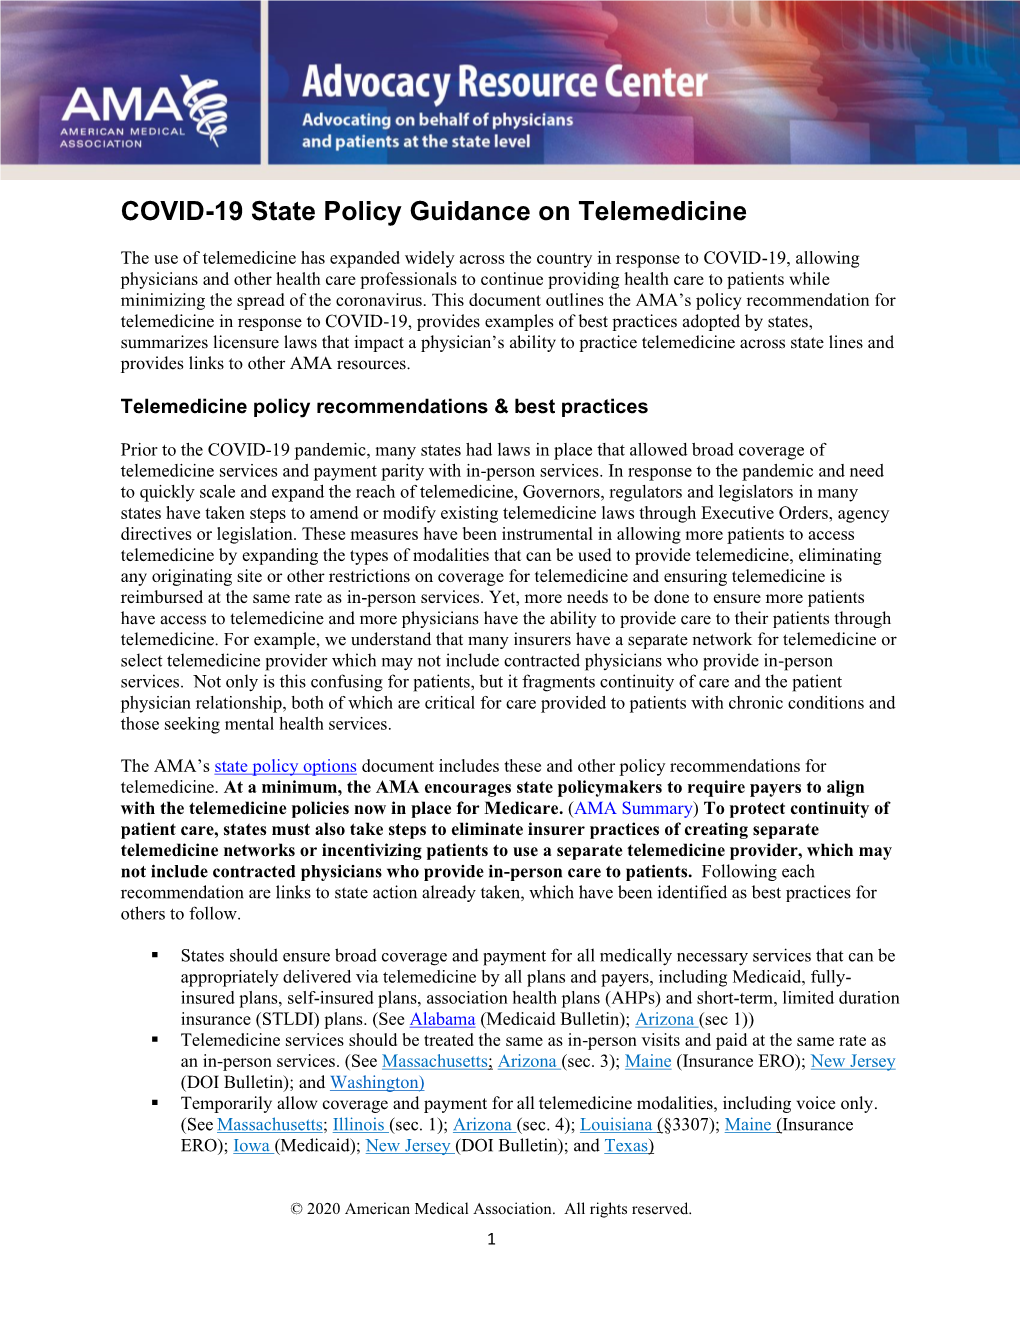 COVID-19 State Policy Guidance on Telemedicine |